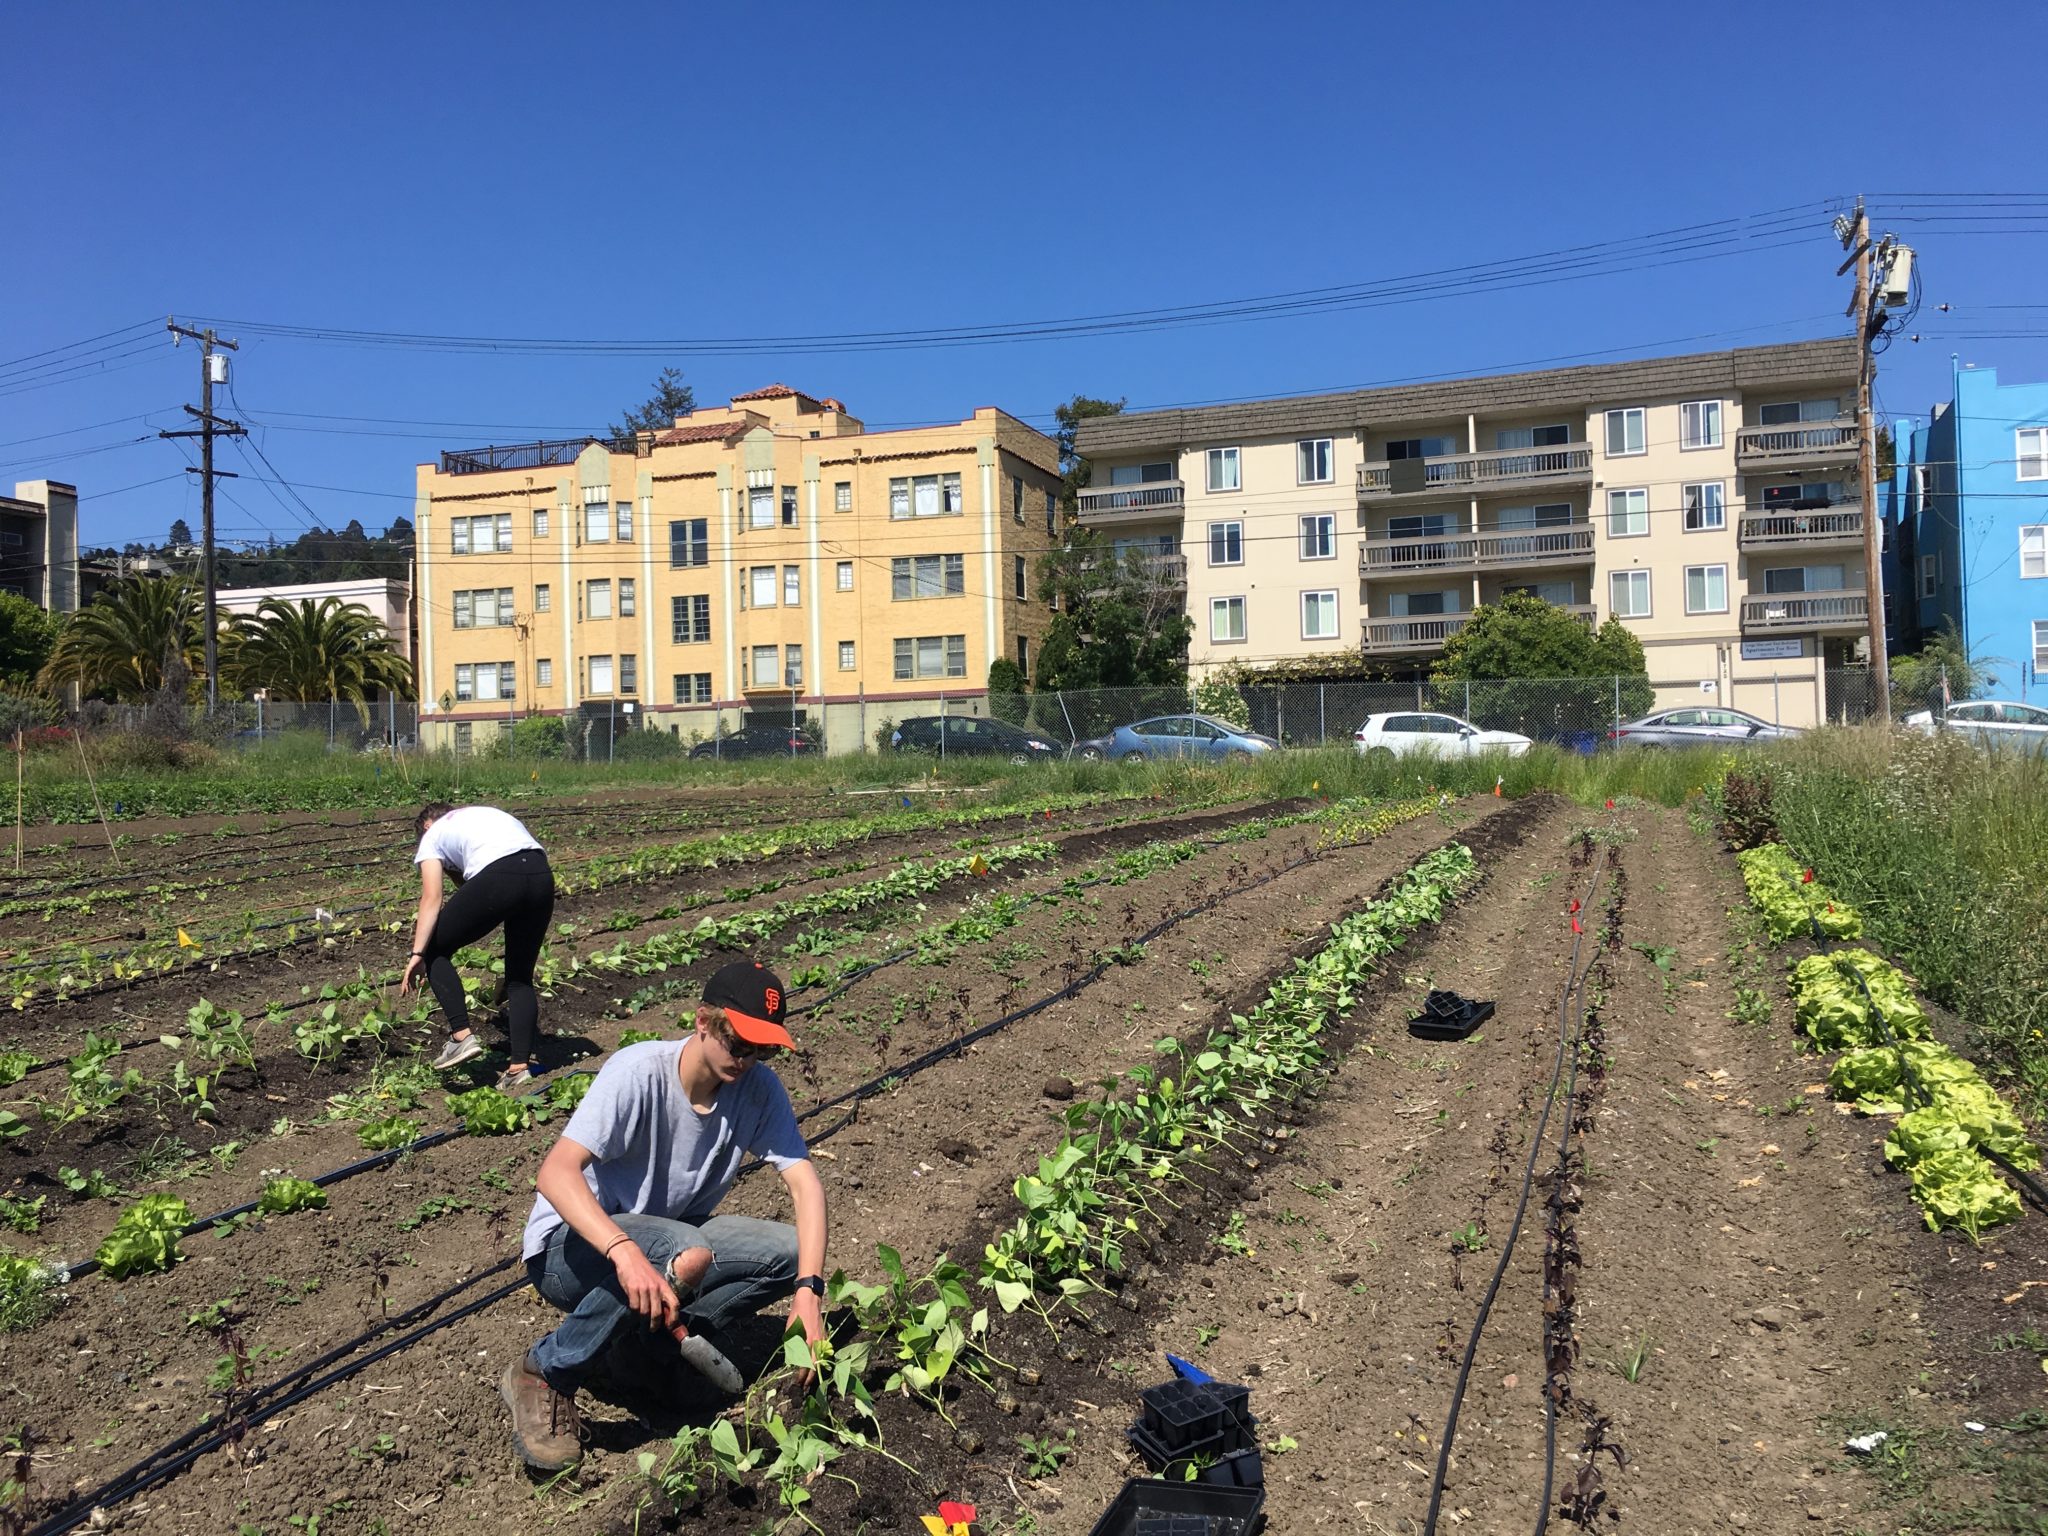 Berkeley students expanding on agroecology skills at the Oxford Tract.